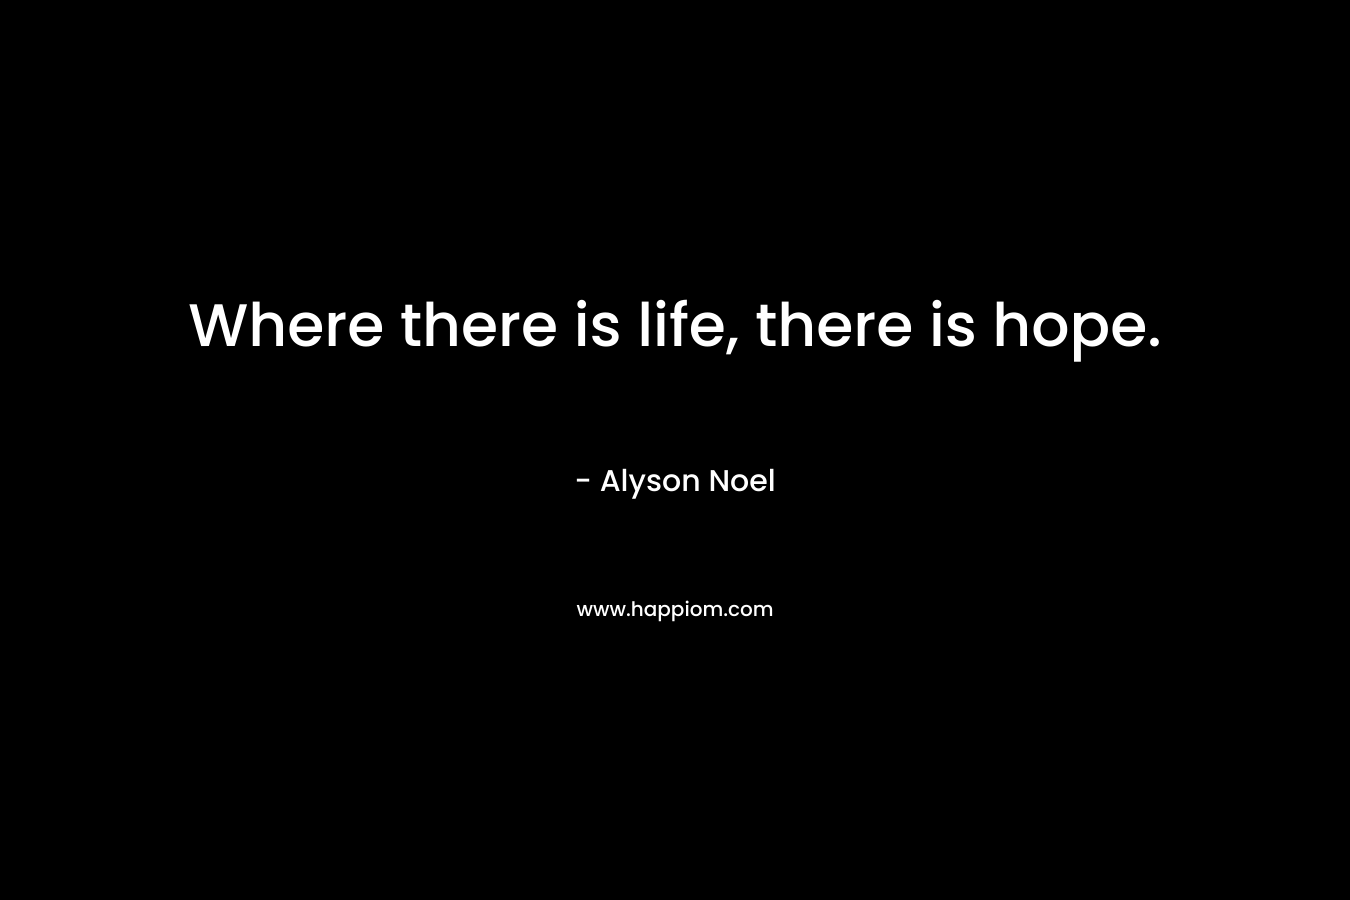 Where there is life, there is hope. – Alyson Noel